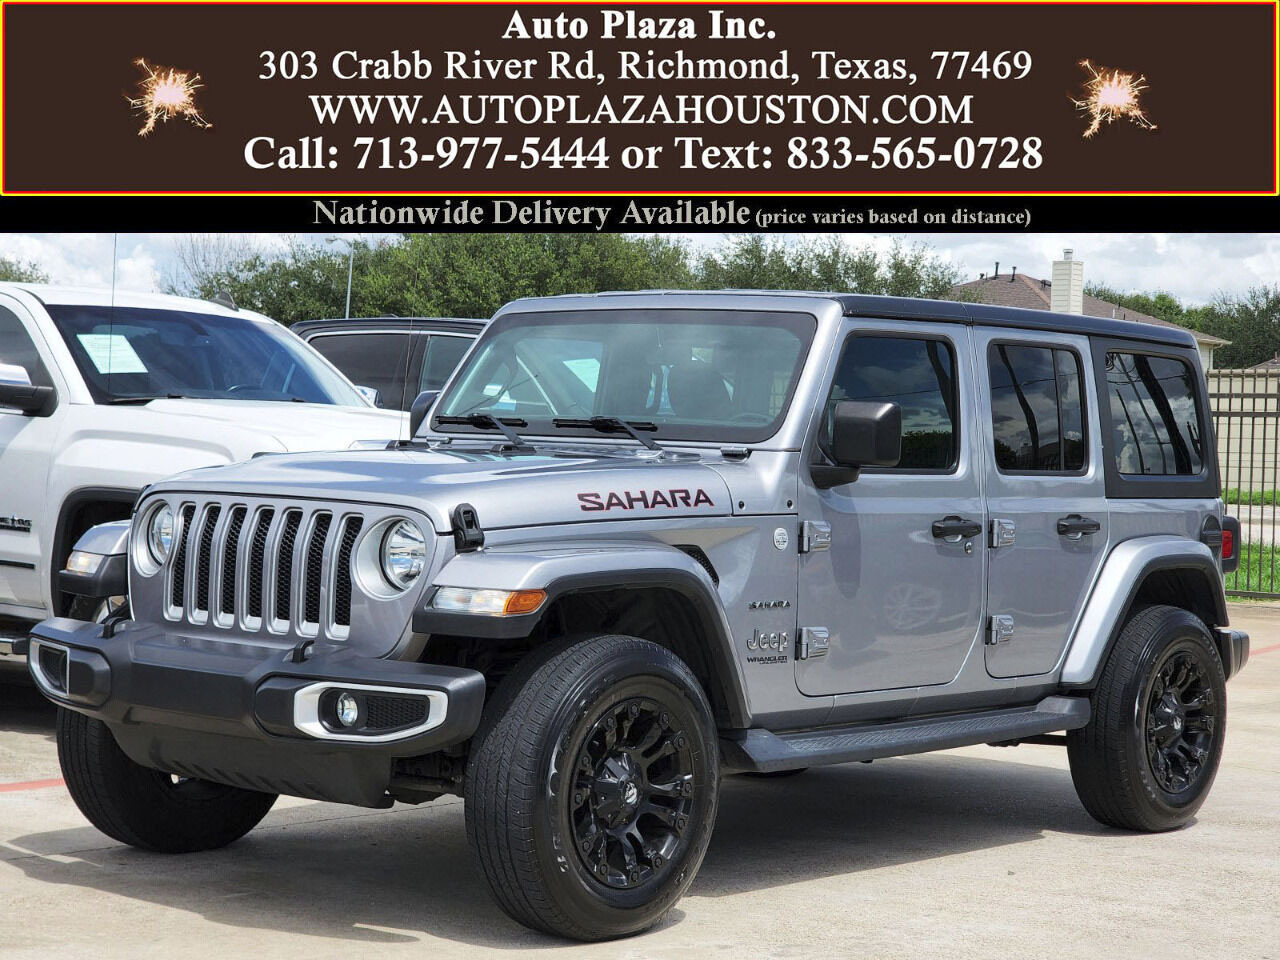 Used 2020 Jeep Wrangler Hybrid for Sale Right Now - Autotrader